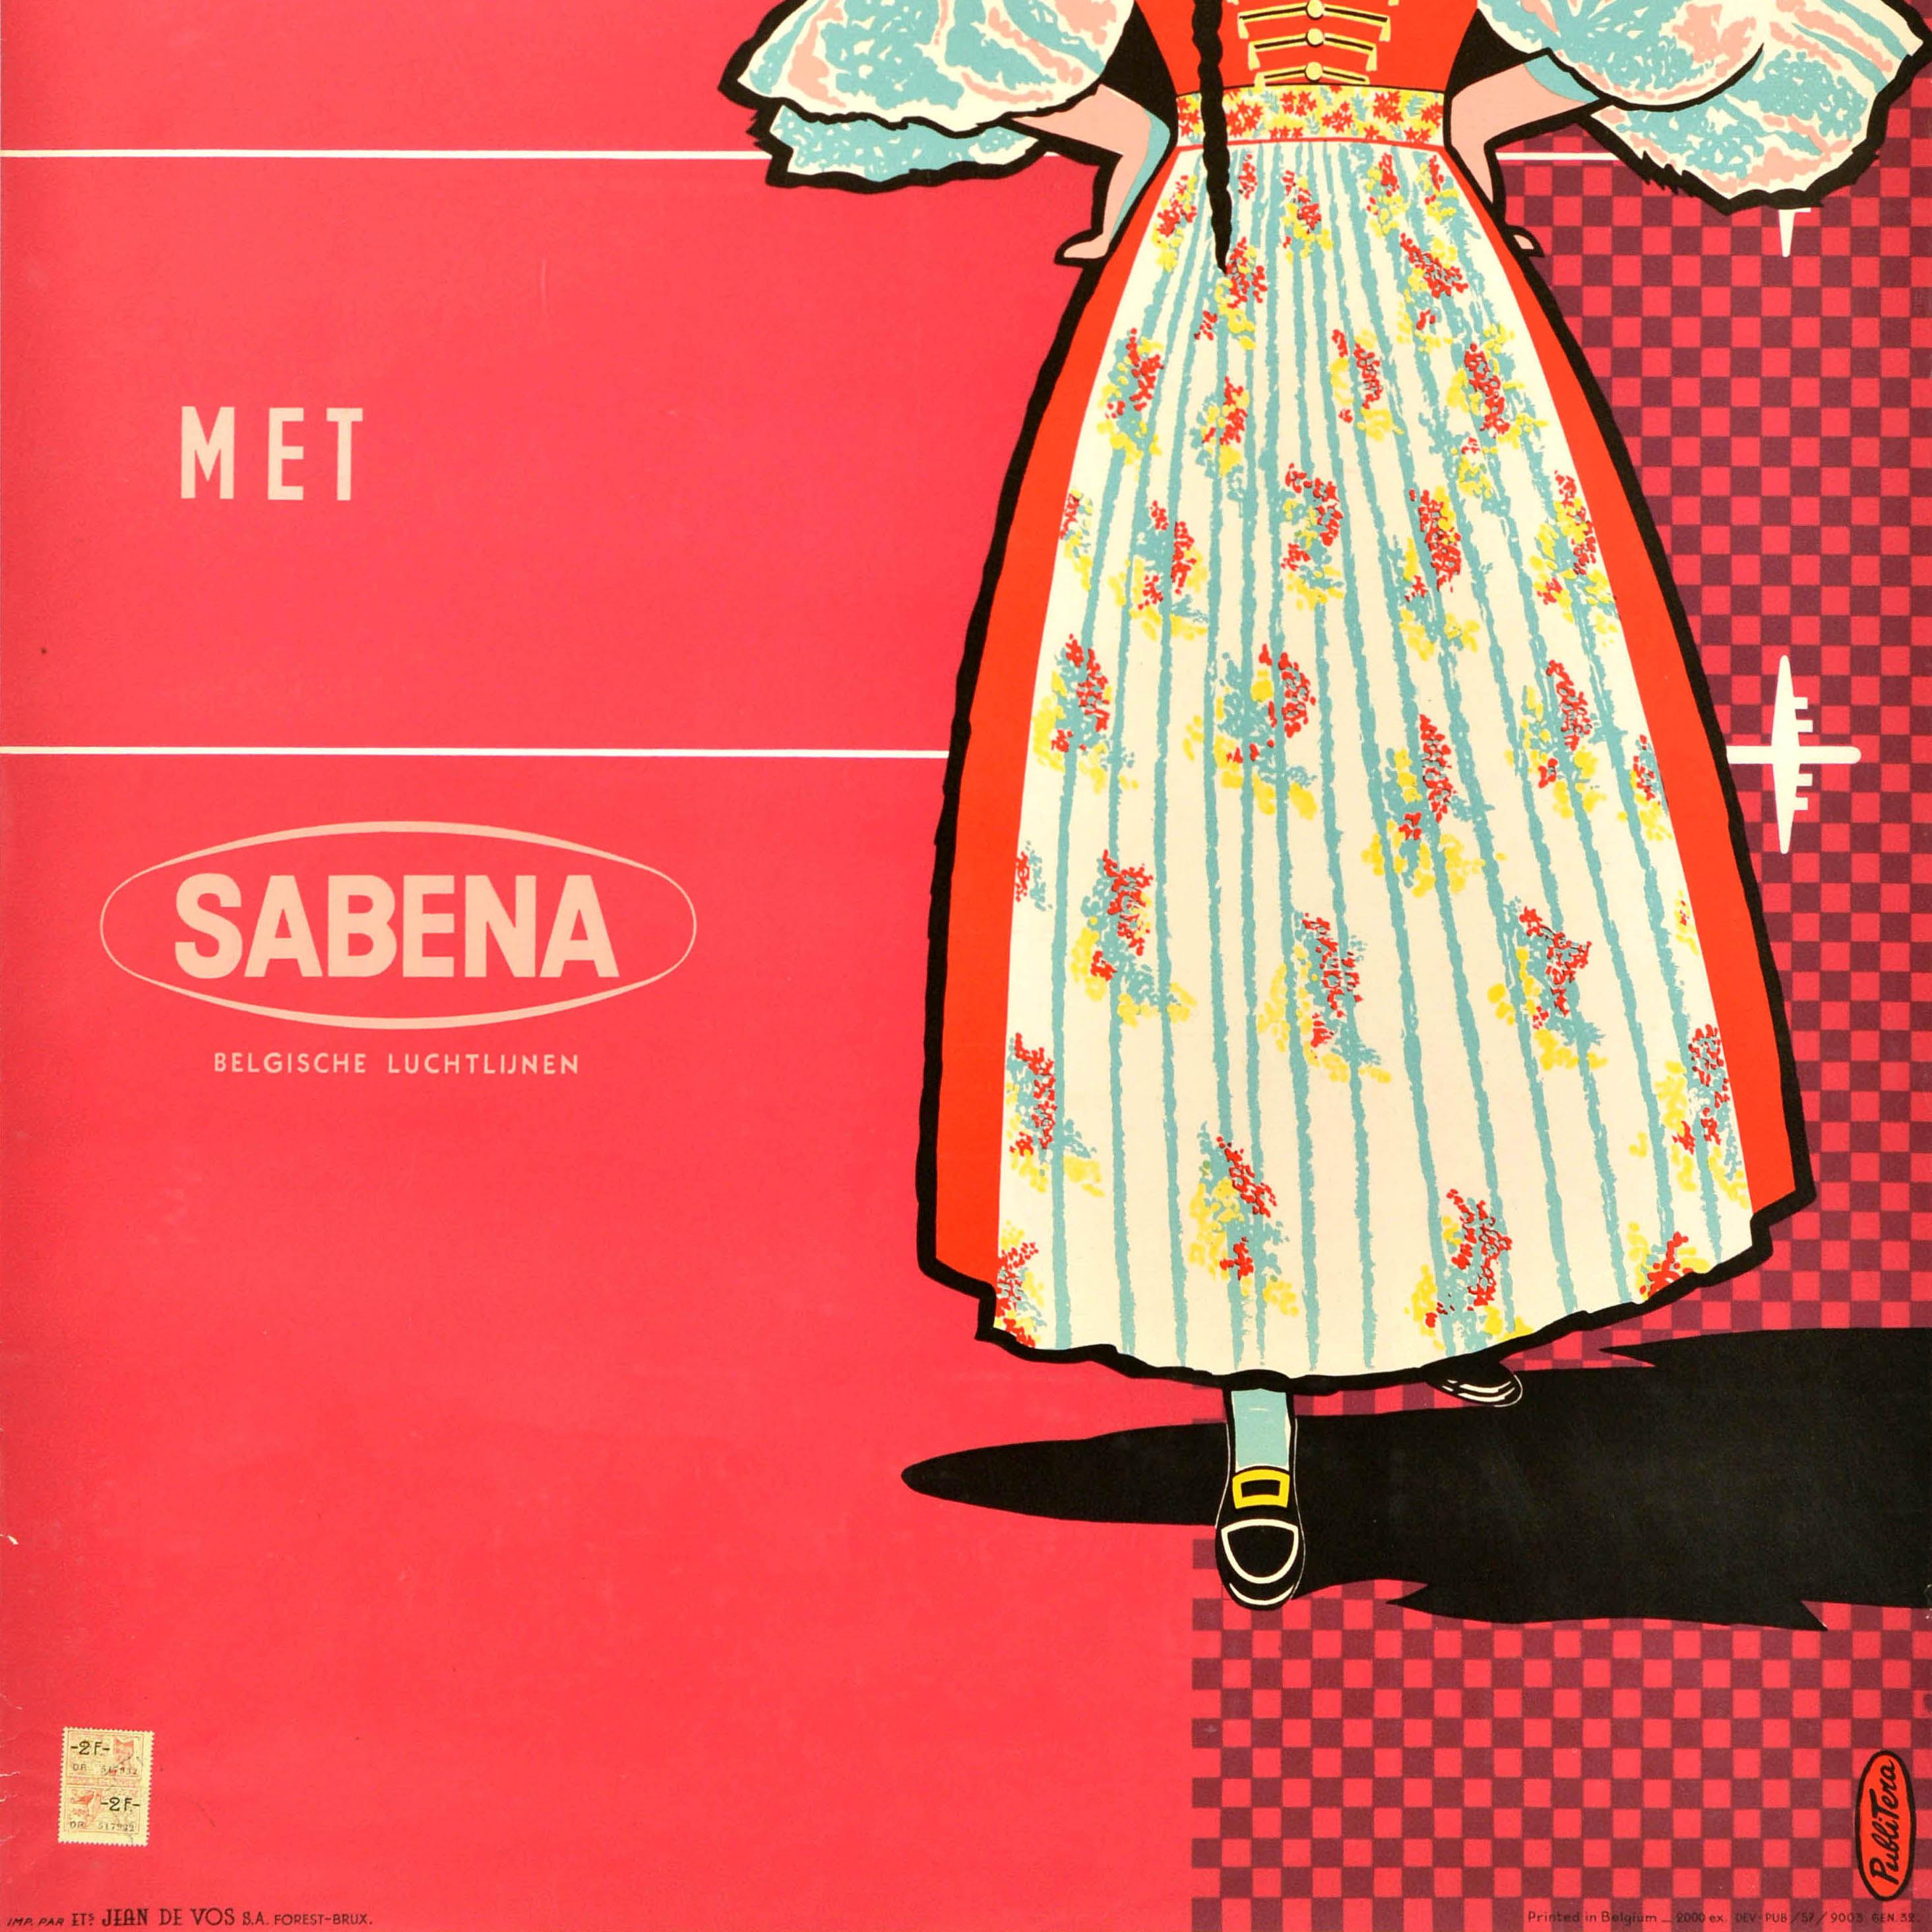 Original Vintage Travel Advertising Poster Poland Sabena Belgian Airlines Polen In Good Condition For Sale In London, GB